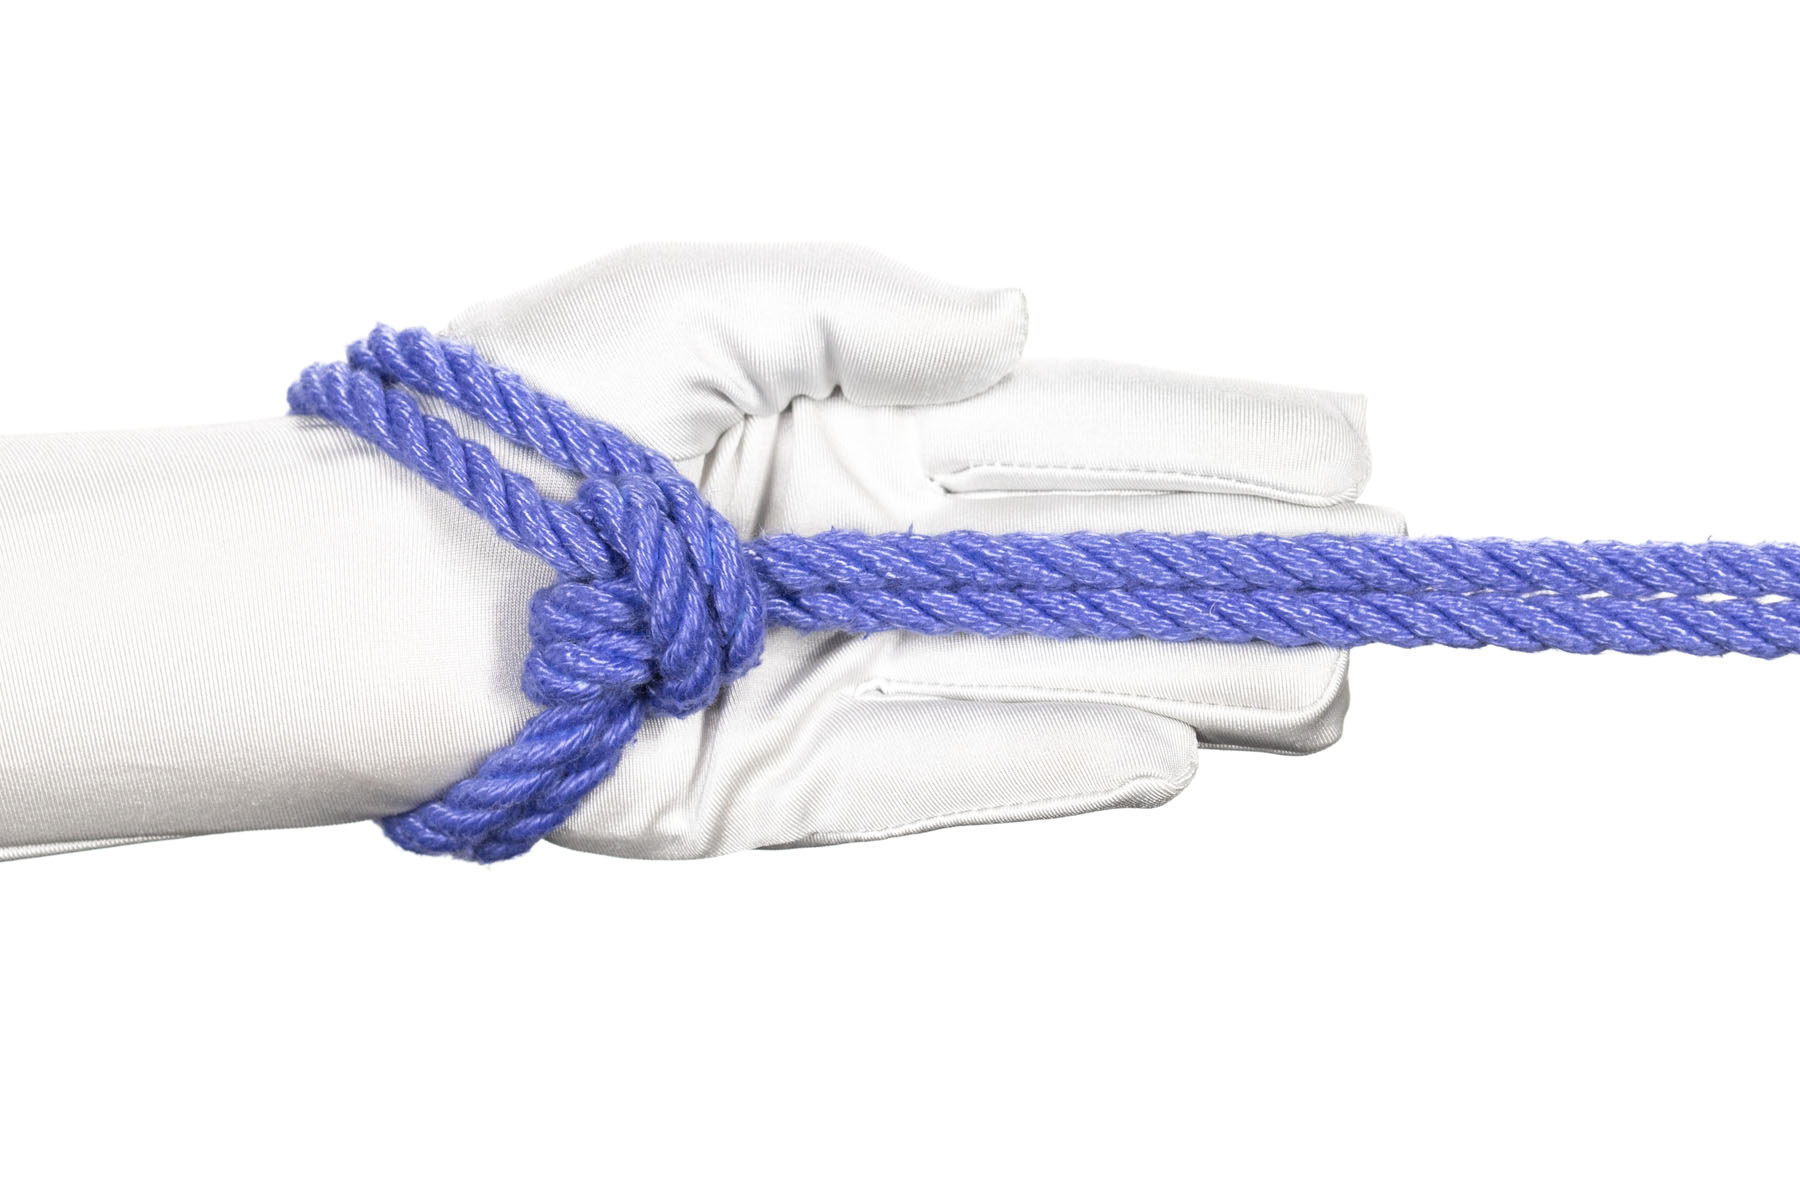 A hand pointing to the right with a single column tie with one wrap tied around it. The rope exits the half hitch facing to the right, so when the rope is pulled to the right the single column tie remains stable.